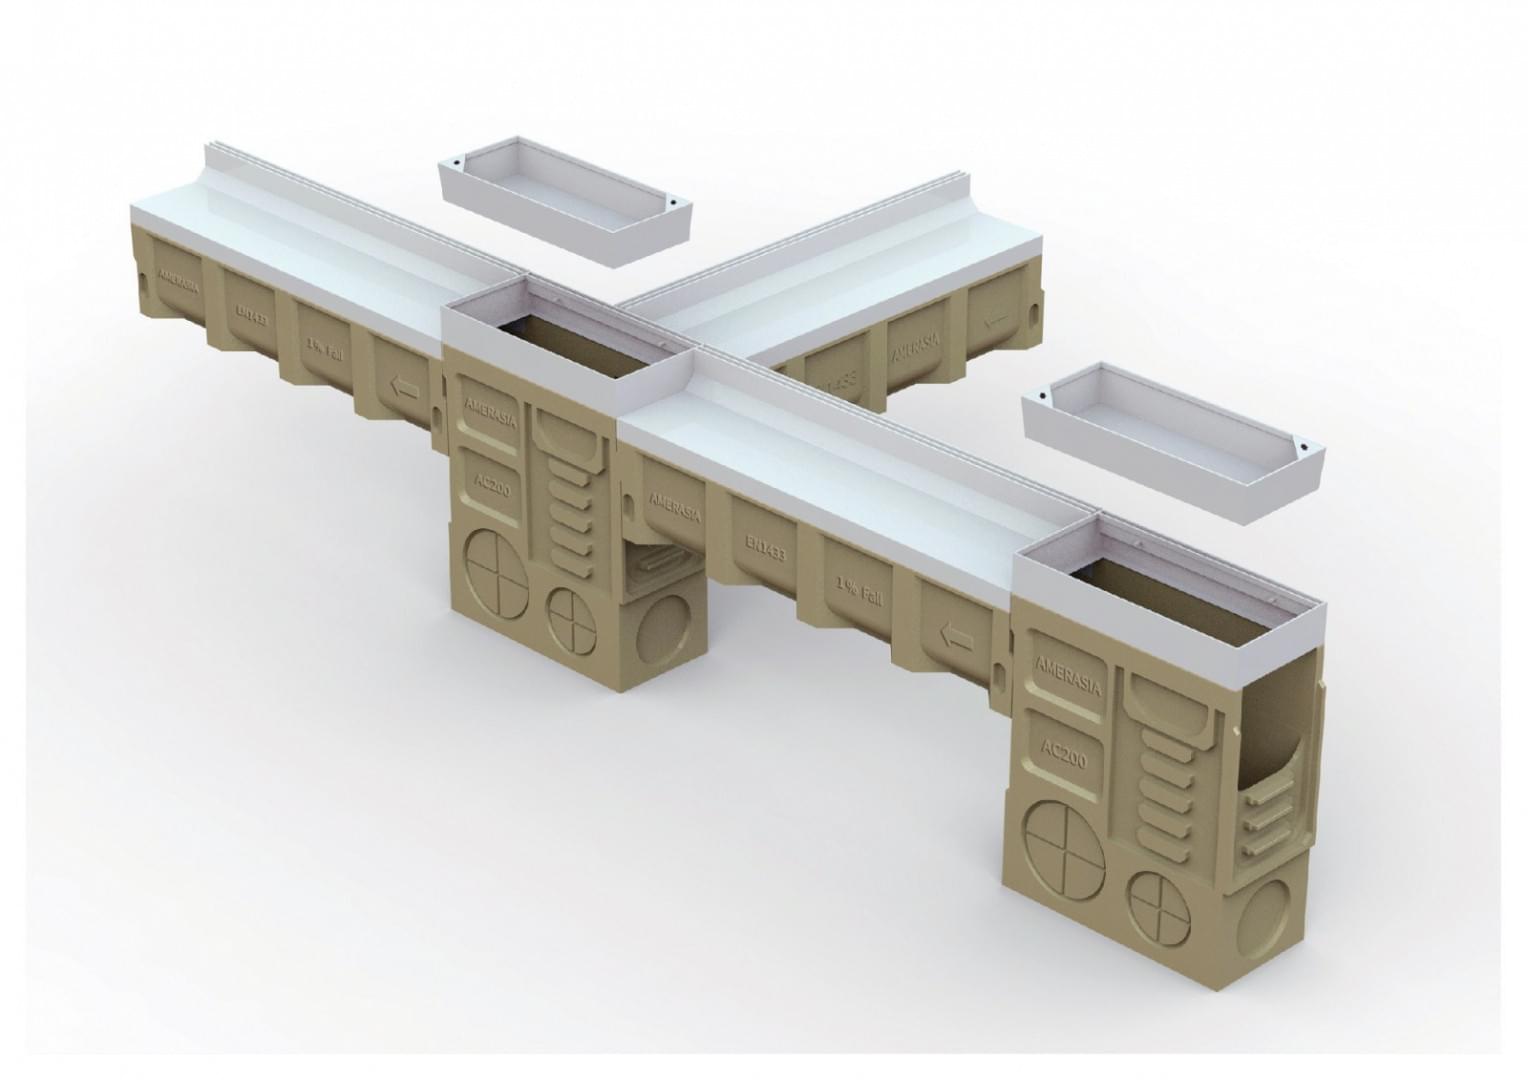 Precast polymer concrete slot drain channel with 1% fall from PMS Engineering